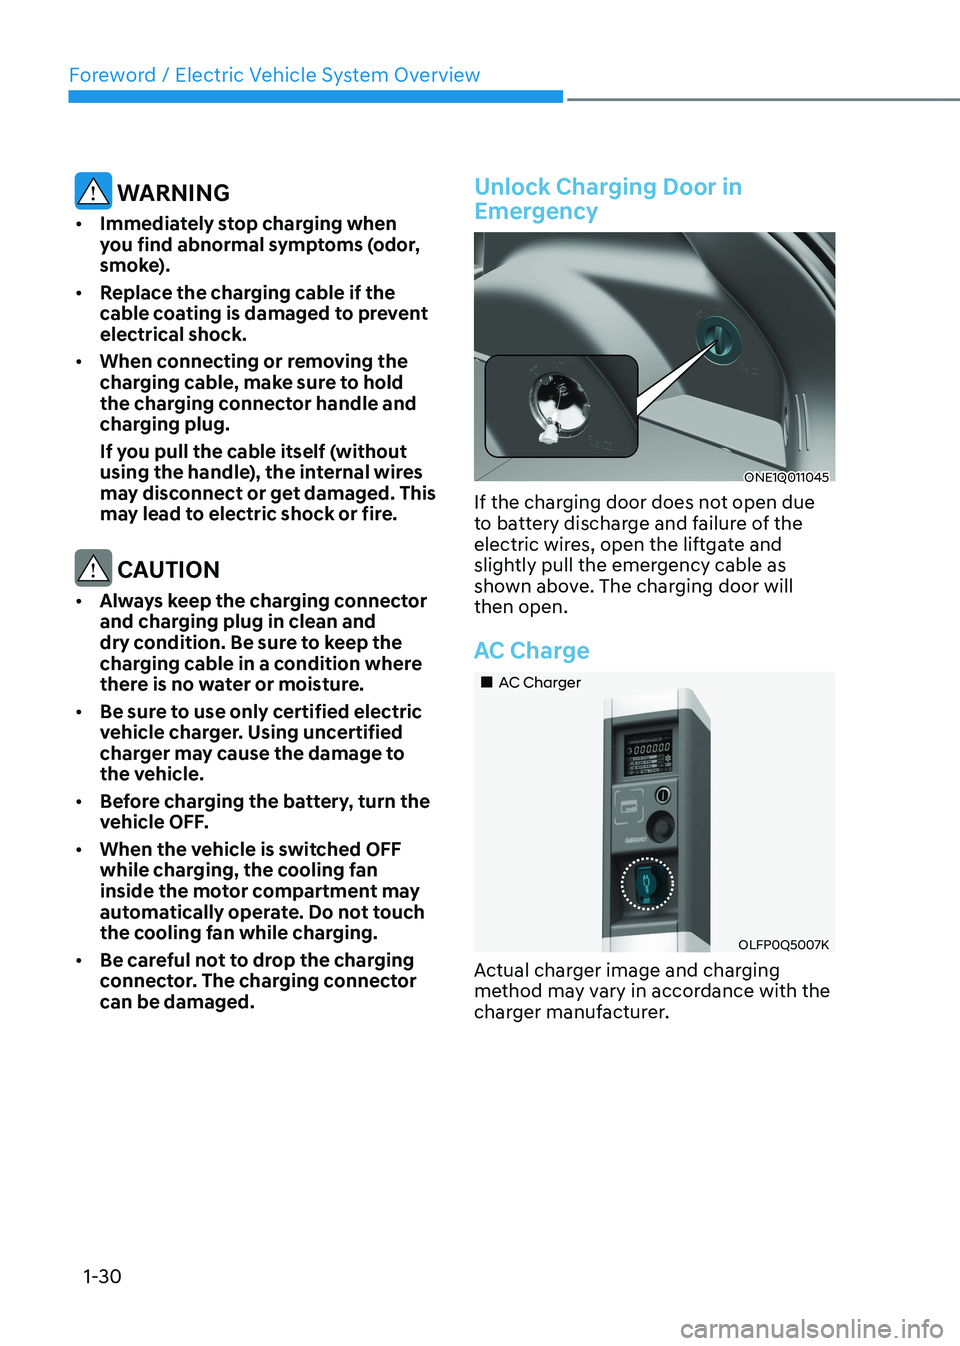 HYUNDAI IONIQ 5 2023 Owners Guide Foreword / Electric Vehicle System Overview
1-30
 WARNING
•	 Immediately stop charging when  
you find abnormal symptoms (odor, 
smoke). 
•	 Replace the charging cable if the 
cable coating is dam